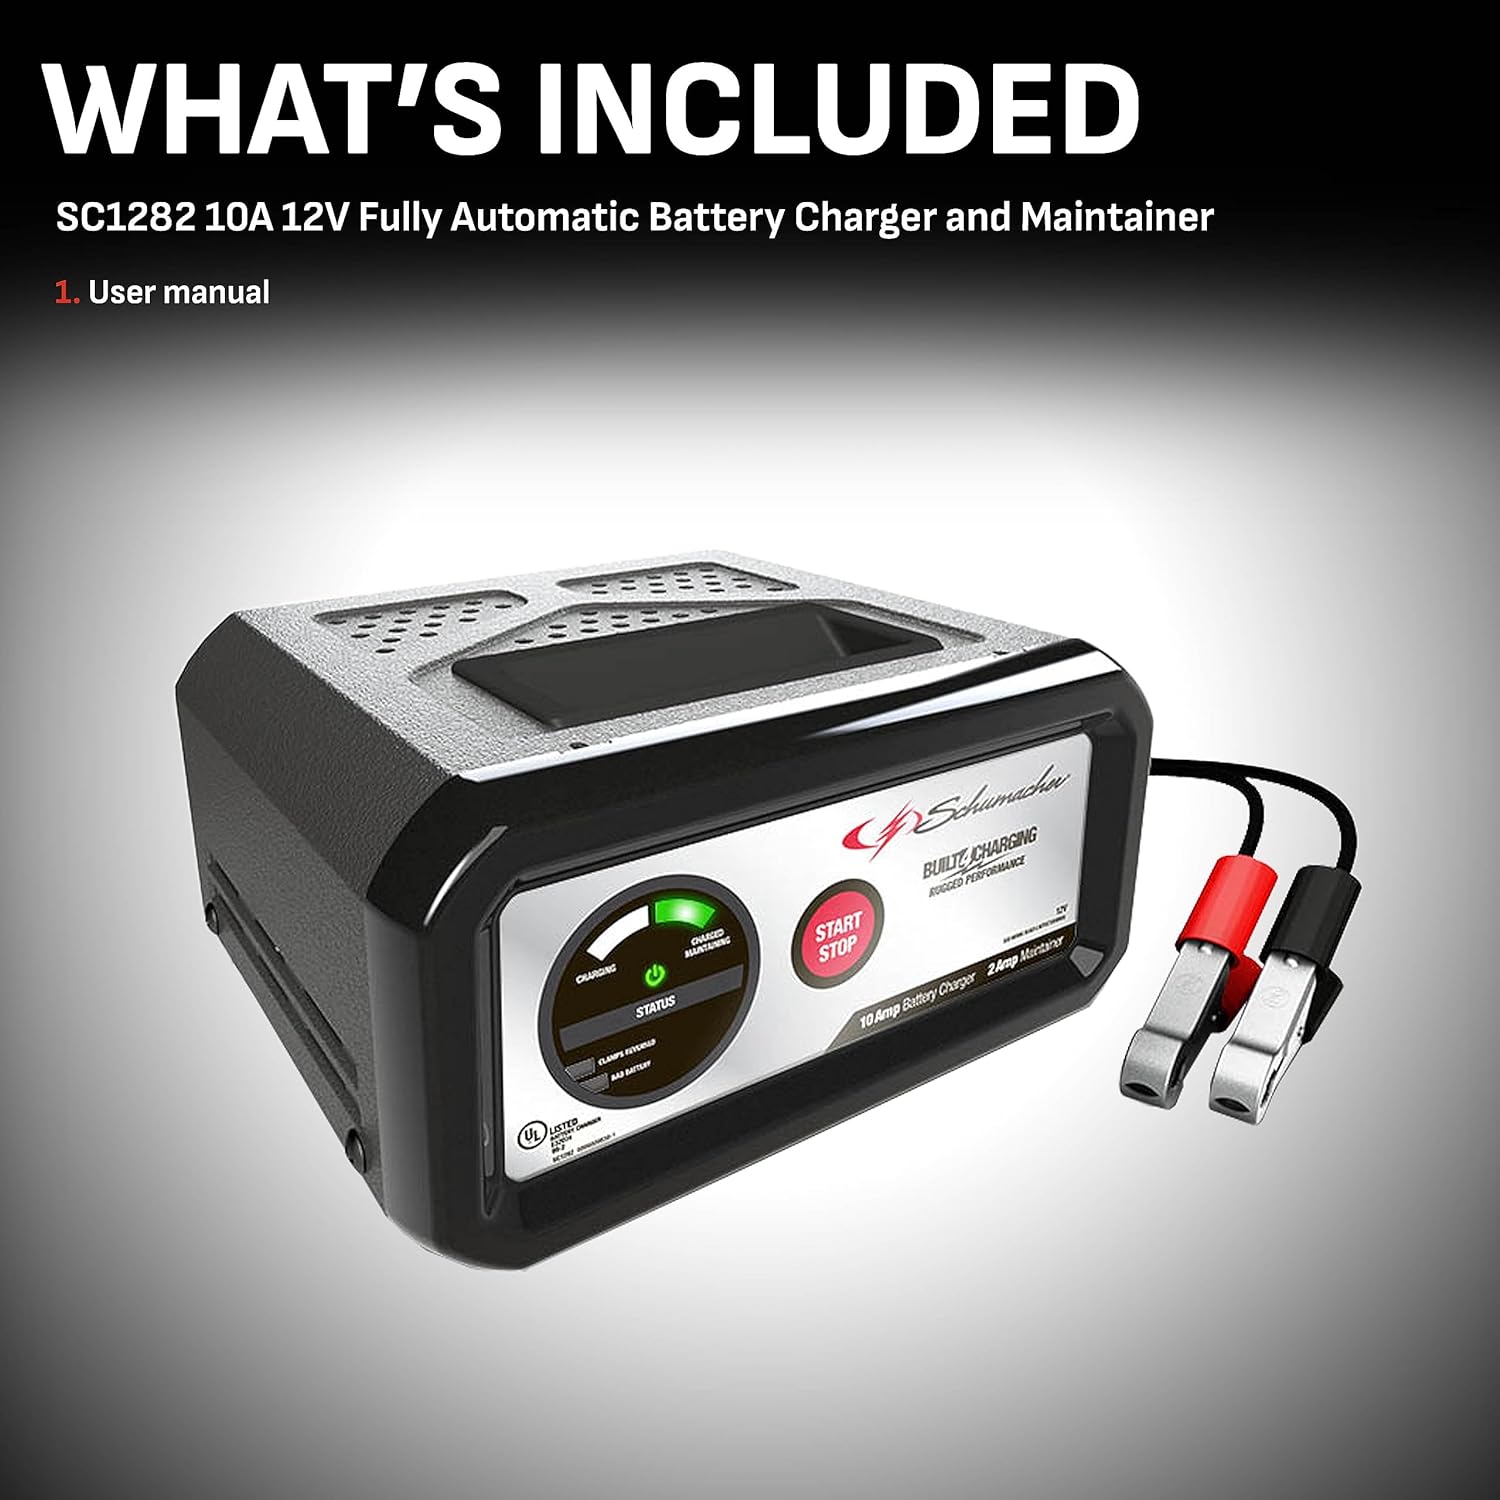 Schumacher SC1282 Fully Automatic Battery Charger and Maintainer - 10 Amp/2 Amp 12V - For Automotive, Marine, and Power Sport Batteries, Black - Schumacher SC1282 Battery Charger Review